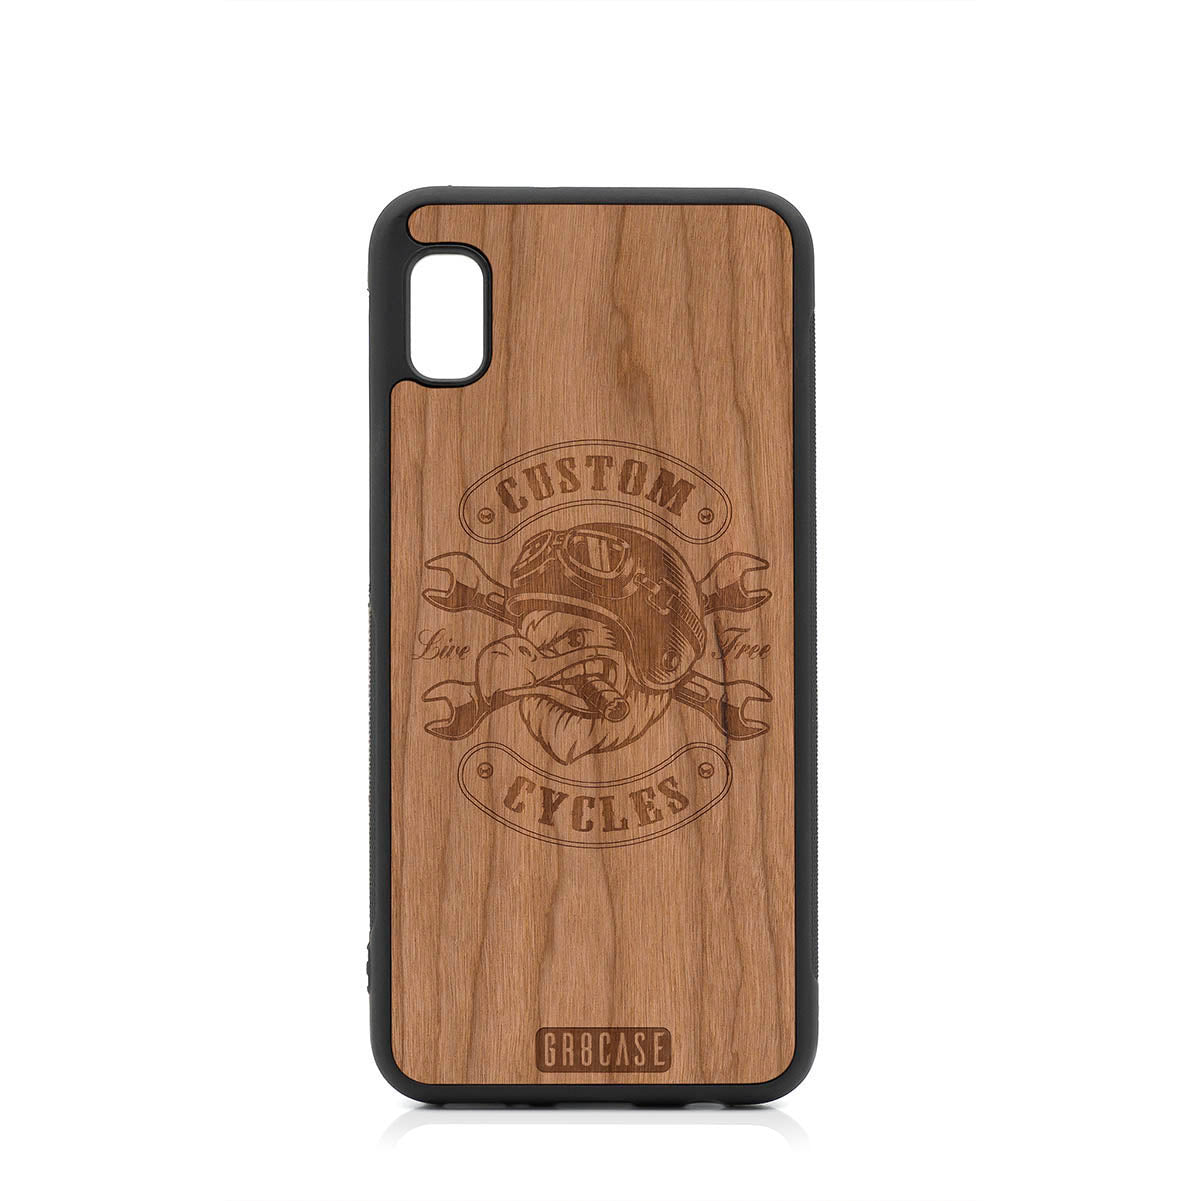 Custom Cycles Live Free (Biker Eagle) Design Wood Case For Samsung Galaxy A10E by GR8CASE